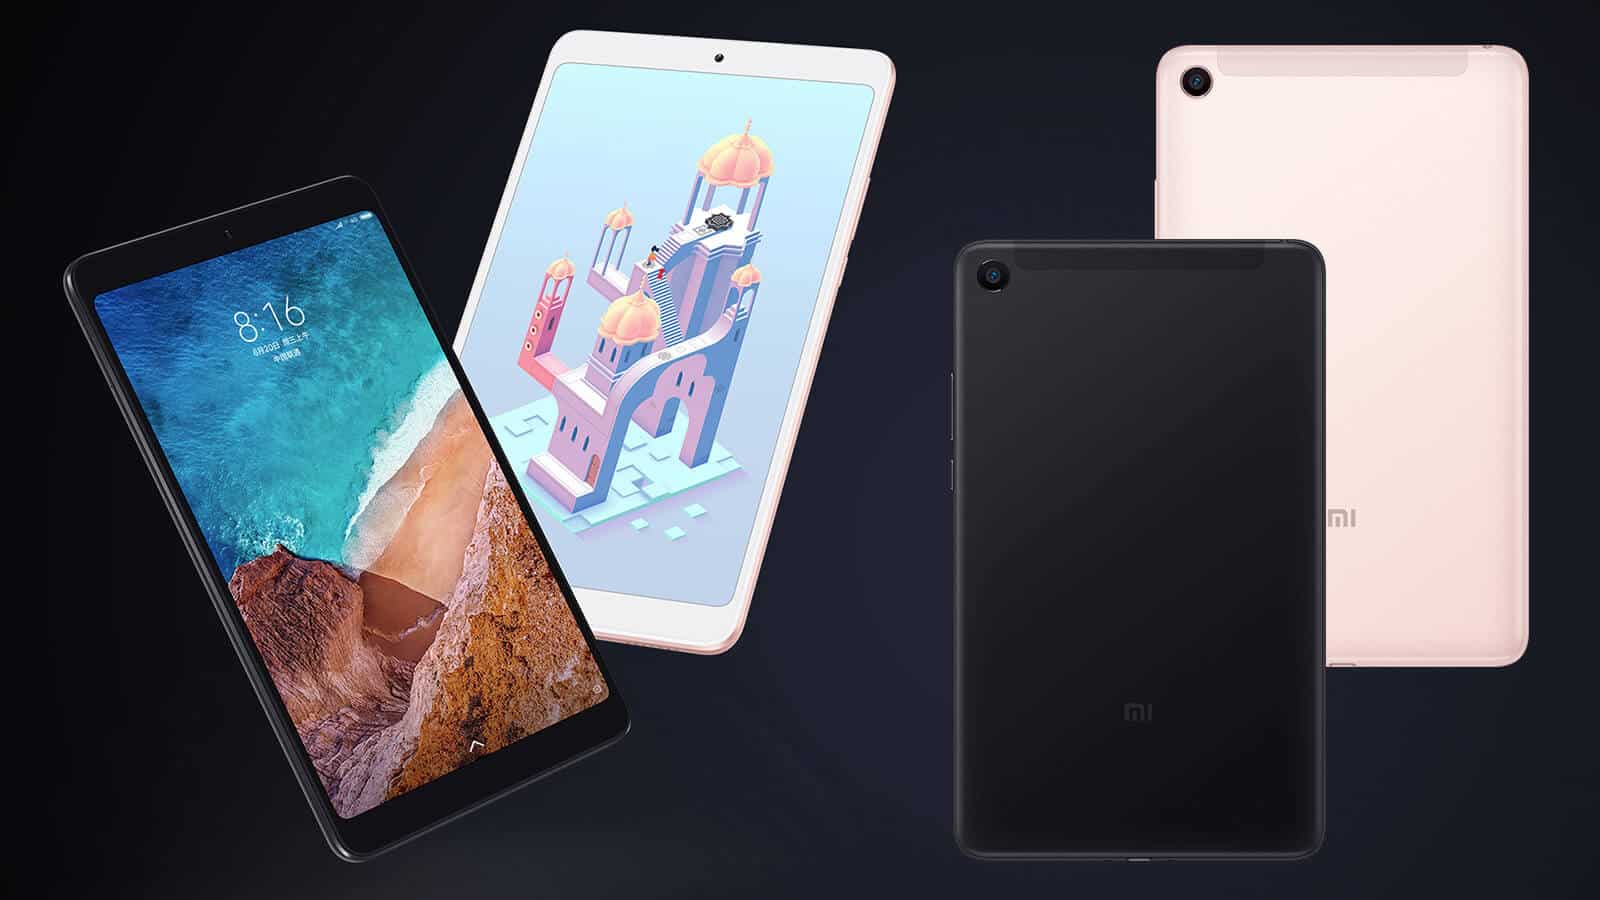 The Snapdragon 660-Powered Xiaomi Mi Pad 4 - Price, Full Specifications & Features